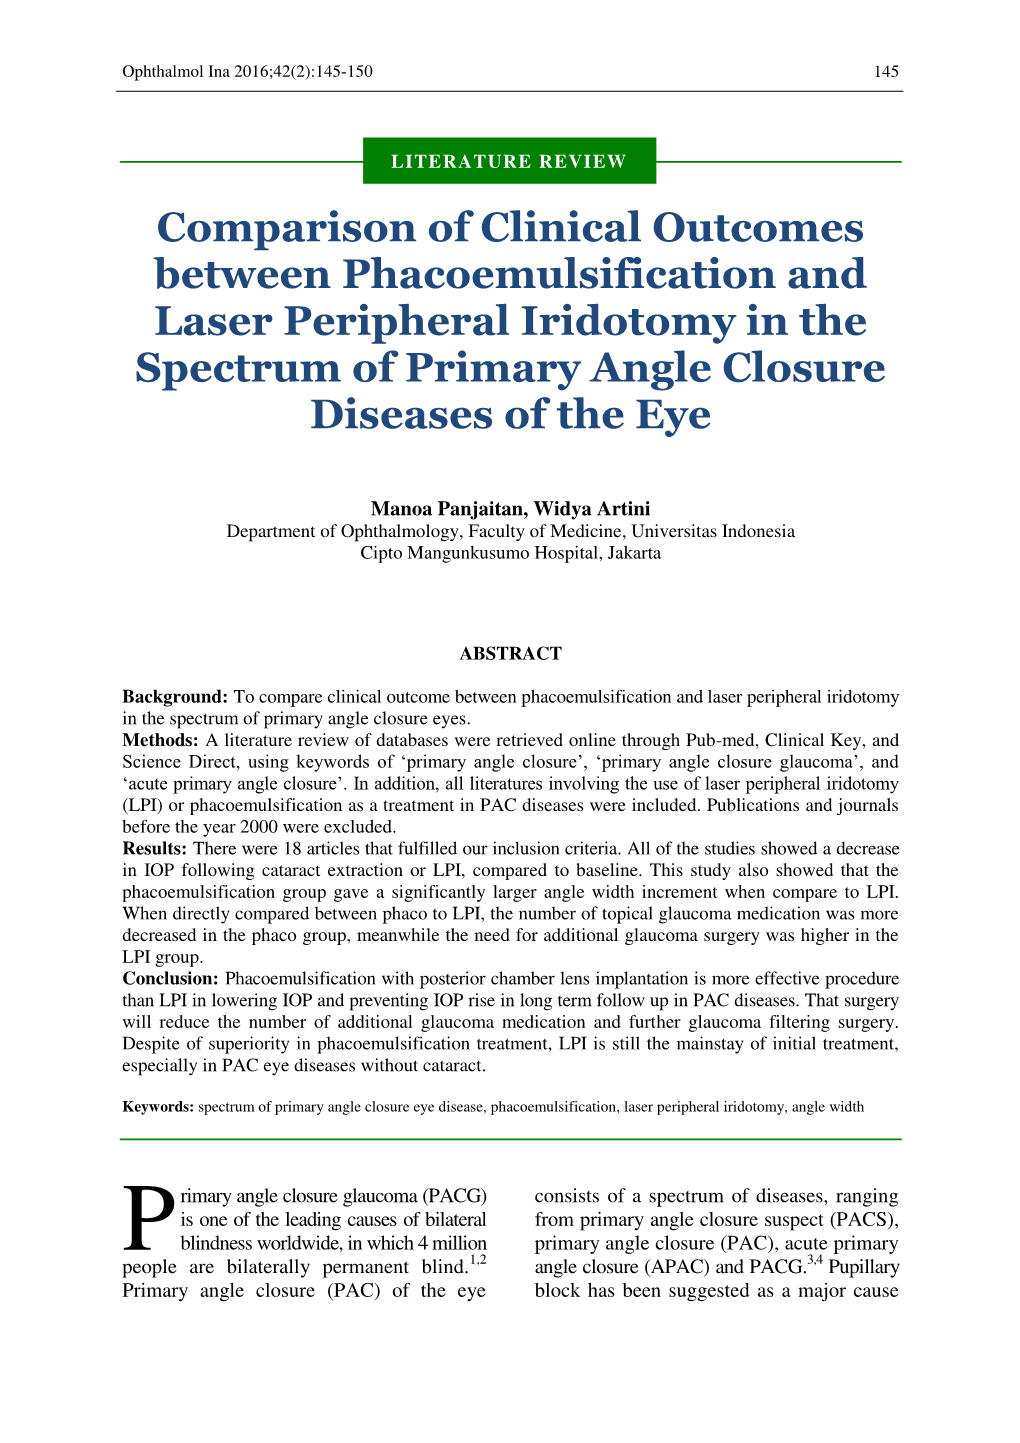 Comparison of Clinical Outcomes Between Phacoemulsification and Laser Peripheral Iridotomy in the Spectrum of Primary Angle Closure Diseases of the Eye